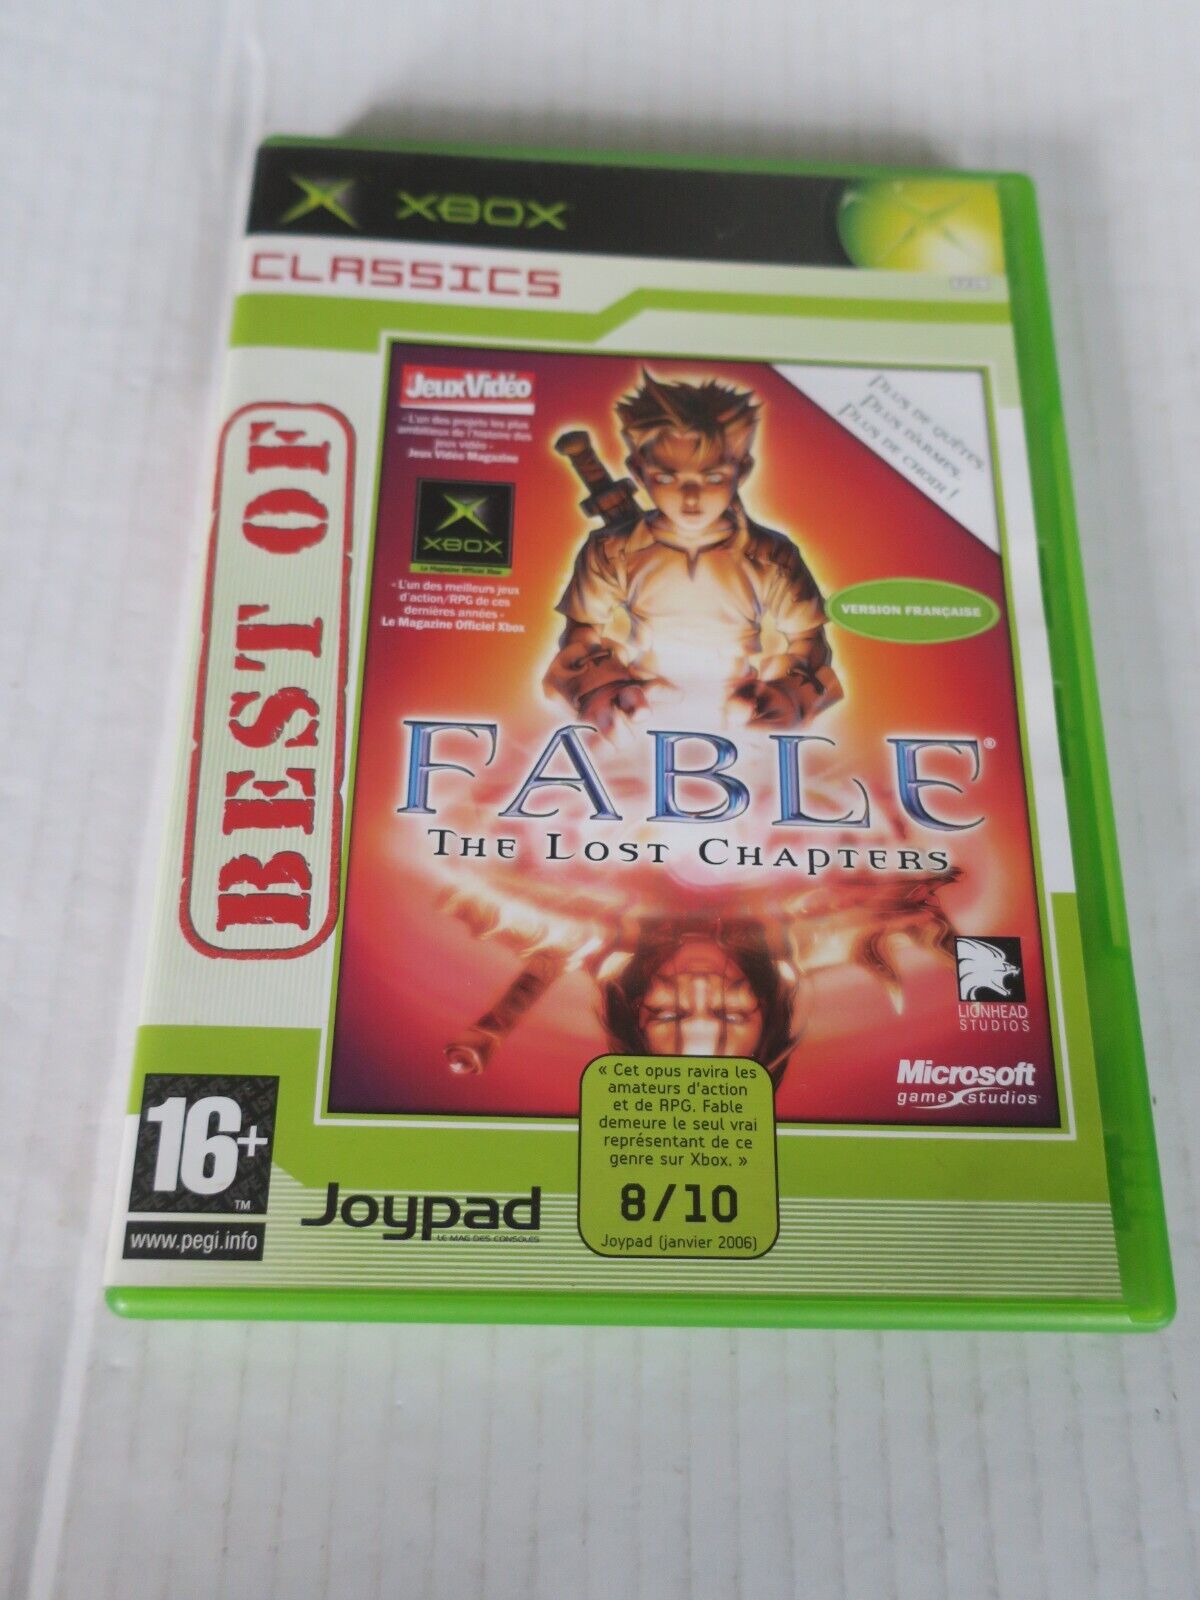 FABLE : THE LOST CHAPTERS    -- EDITION CLASSICS ----- pour XBOX  --  FRANCAIS